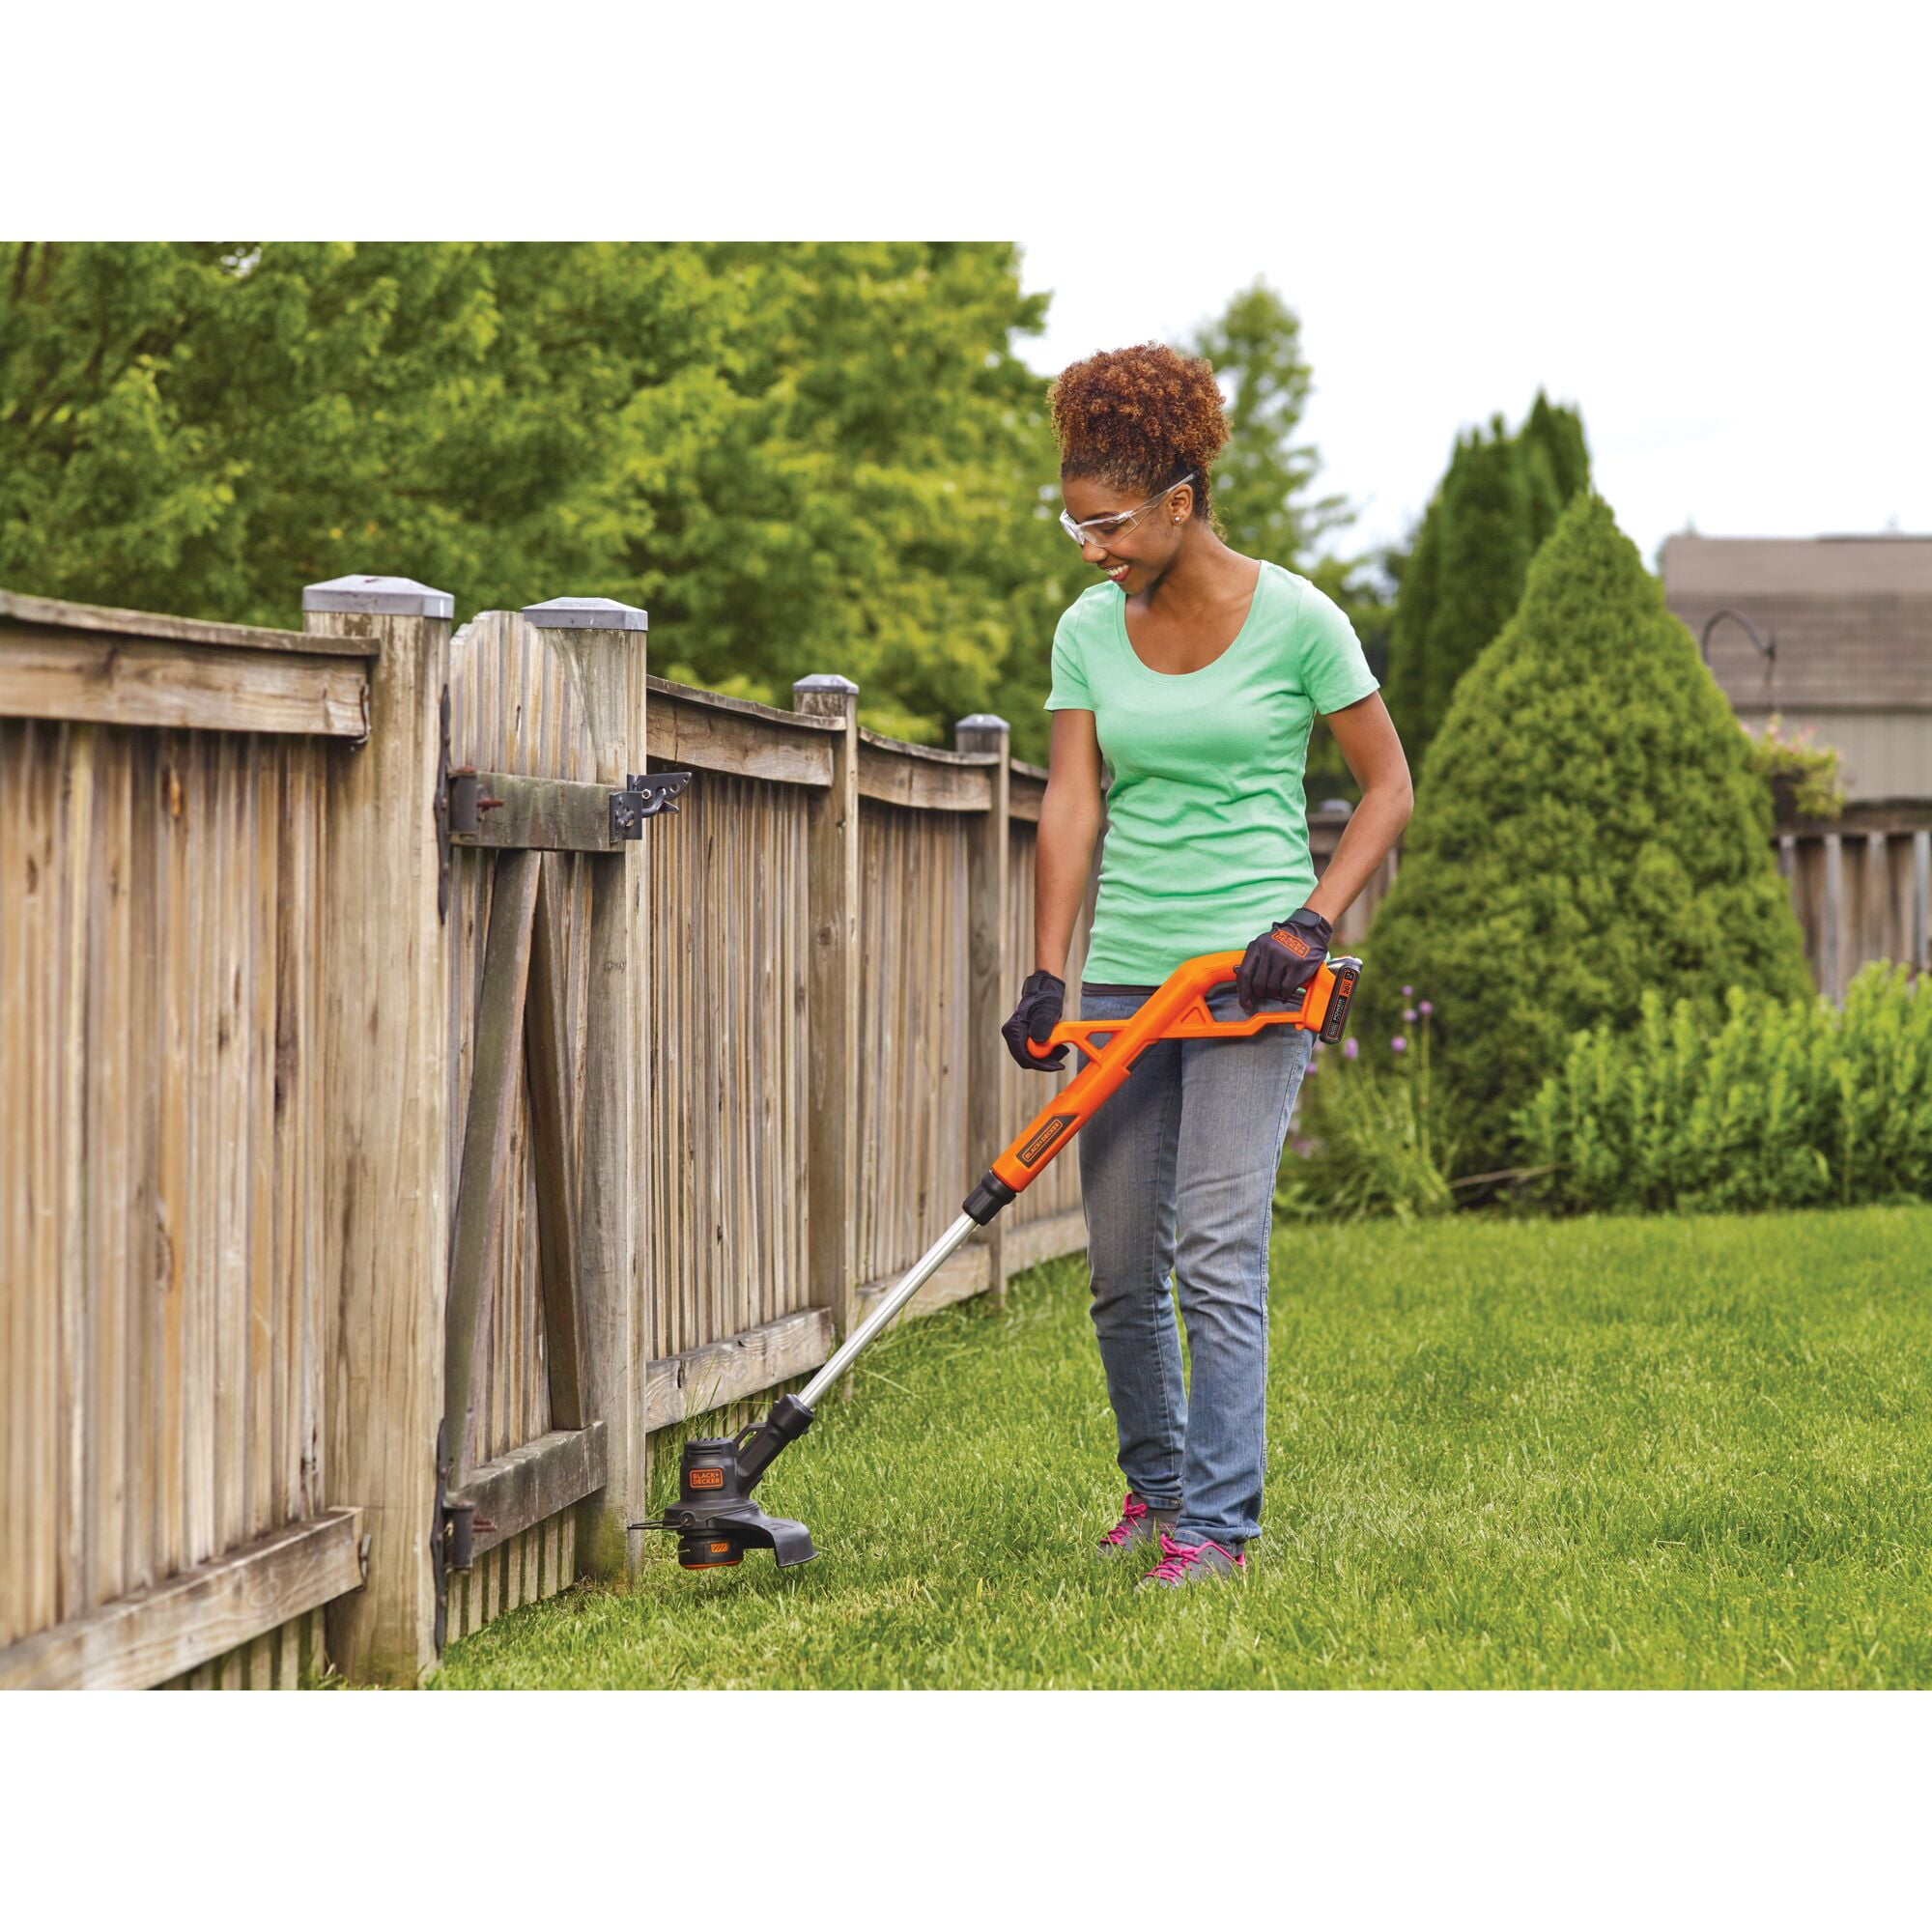 Black and Decker LST420 - Cordless 20V Lith String Trimmer Type 1 